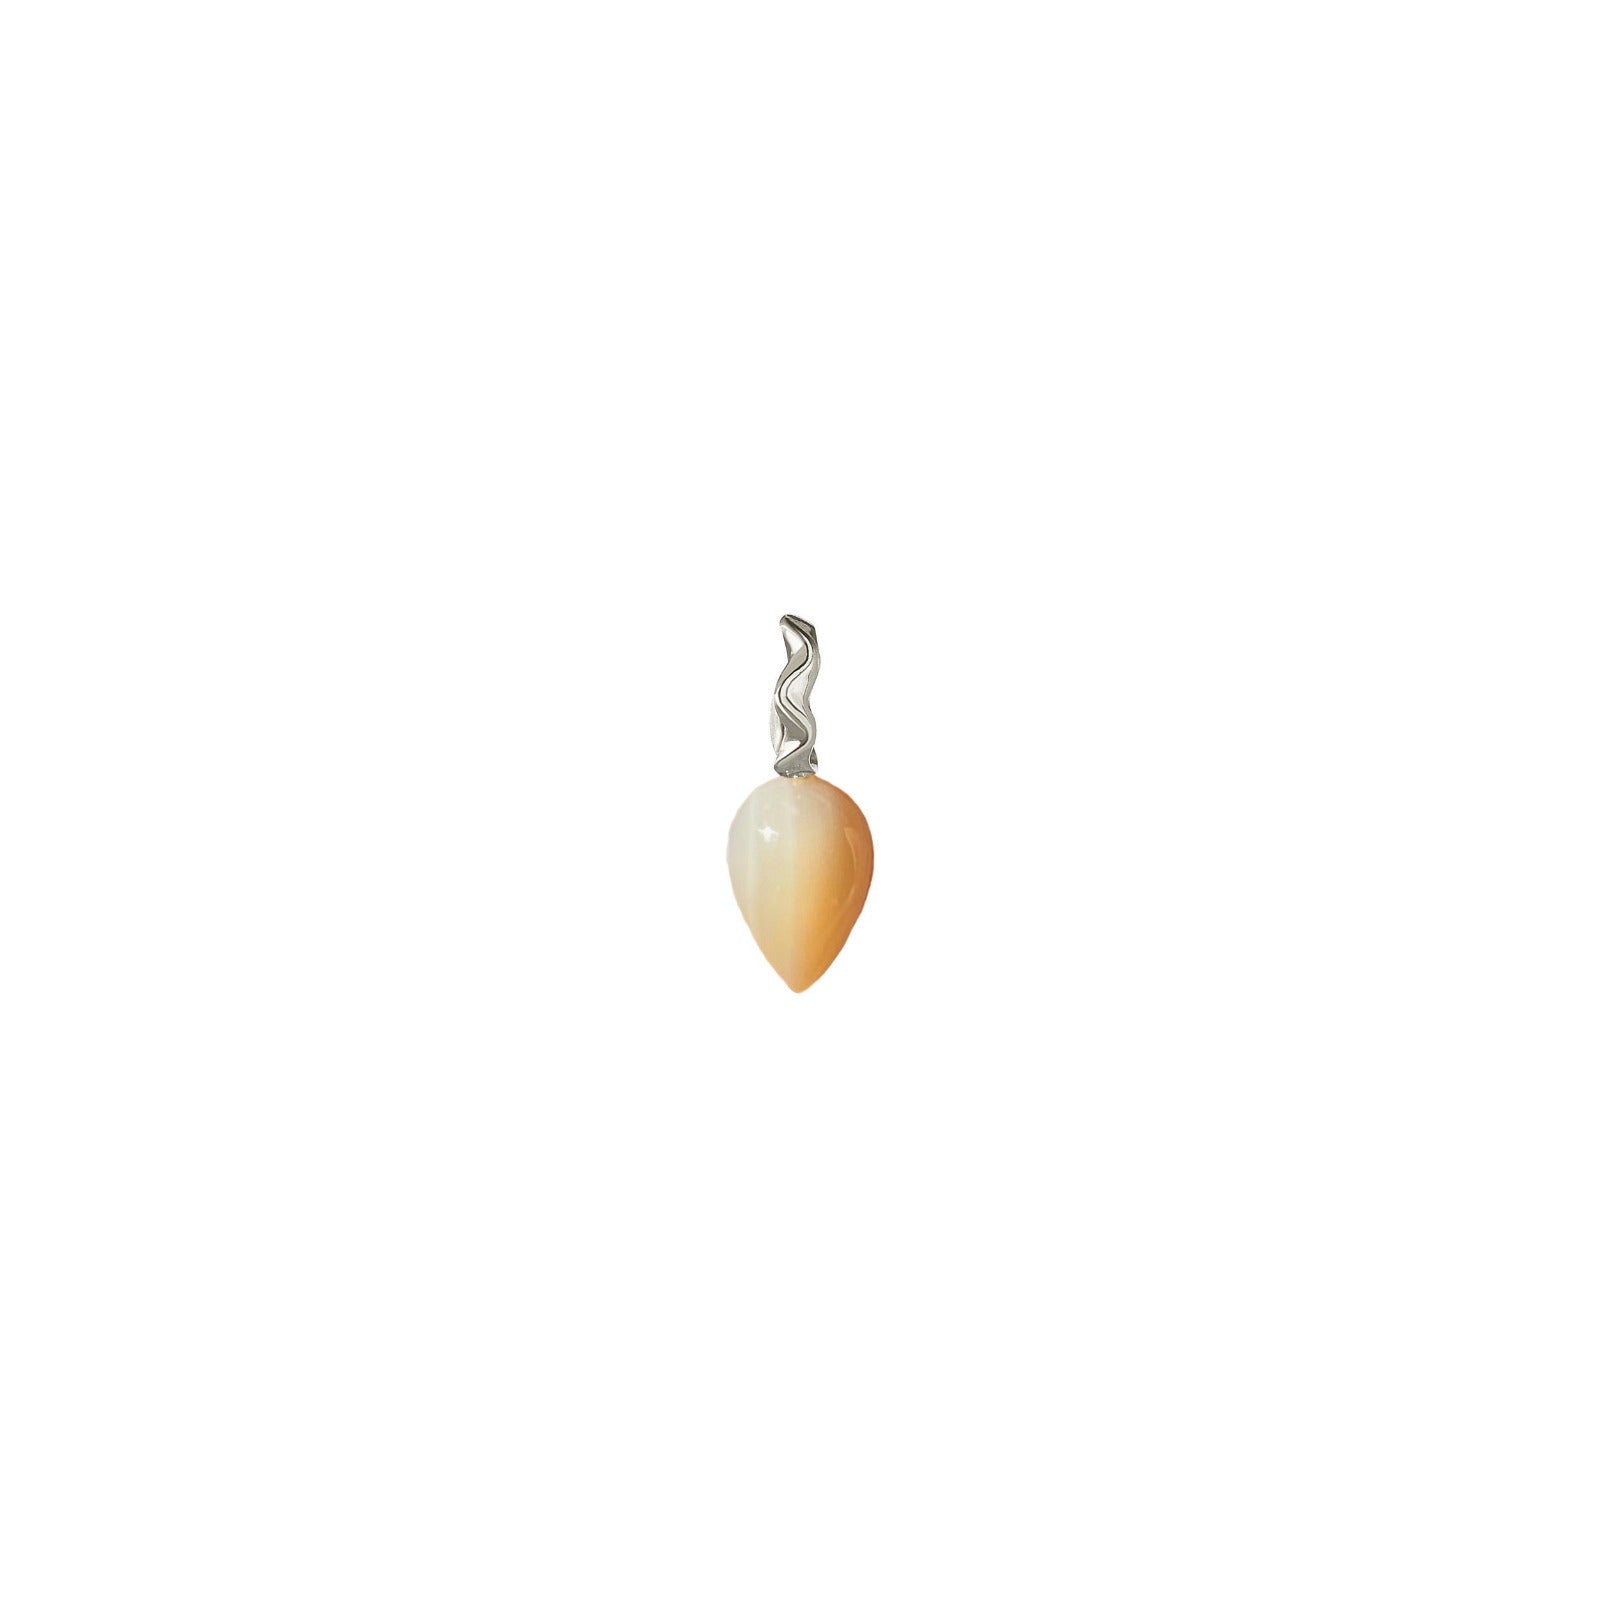 Mother of Pearl acorn drop charm with 14k white gold bail